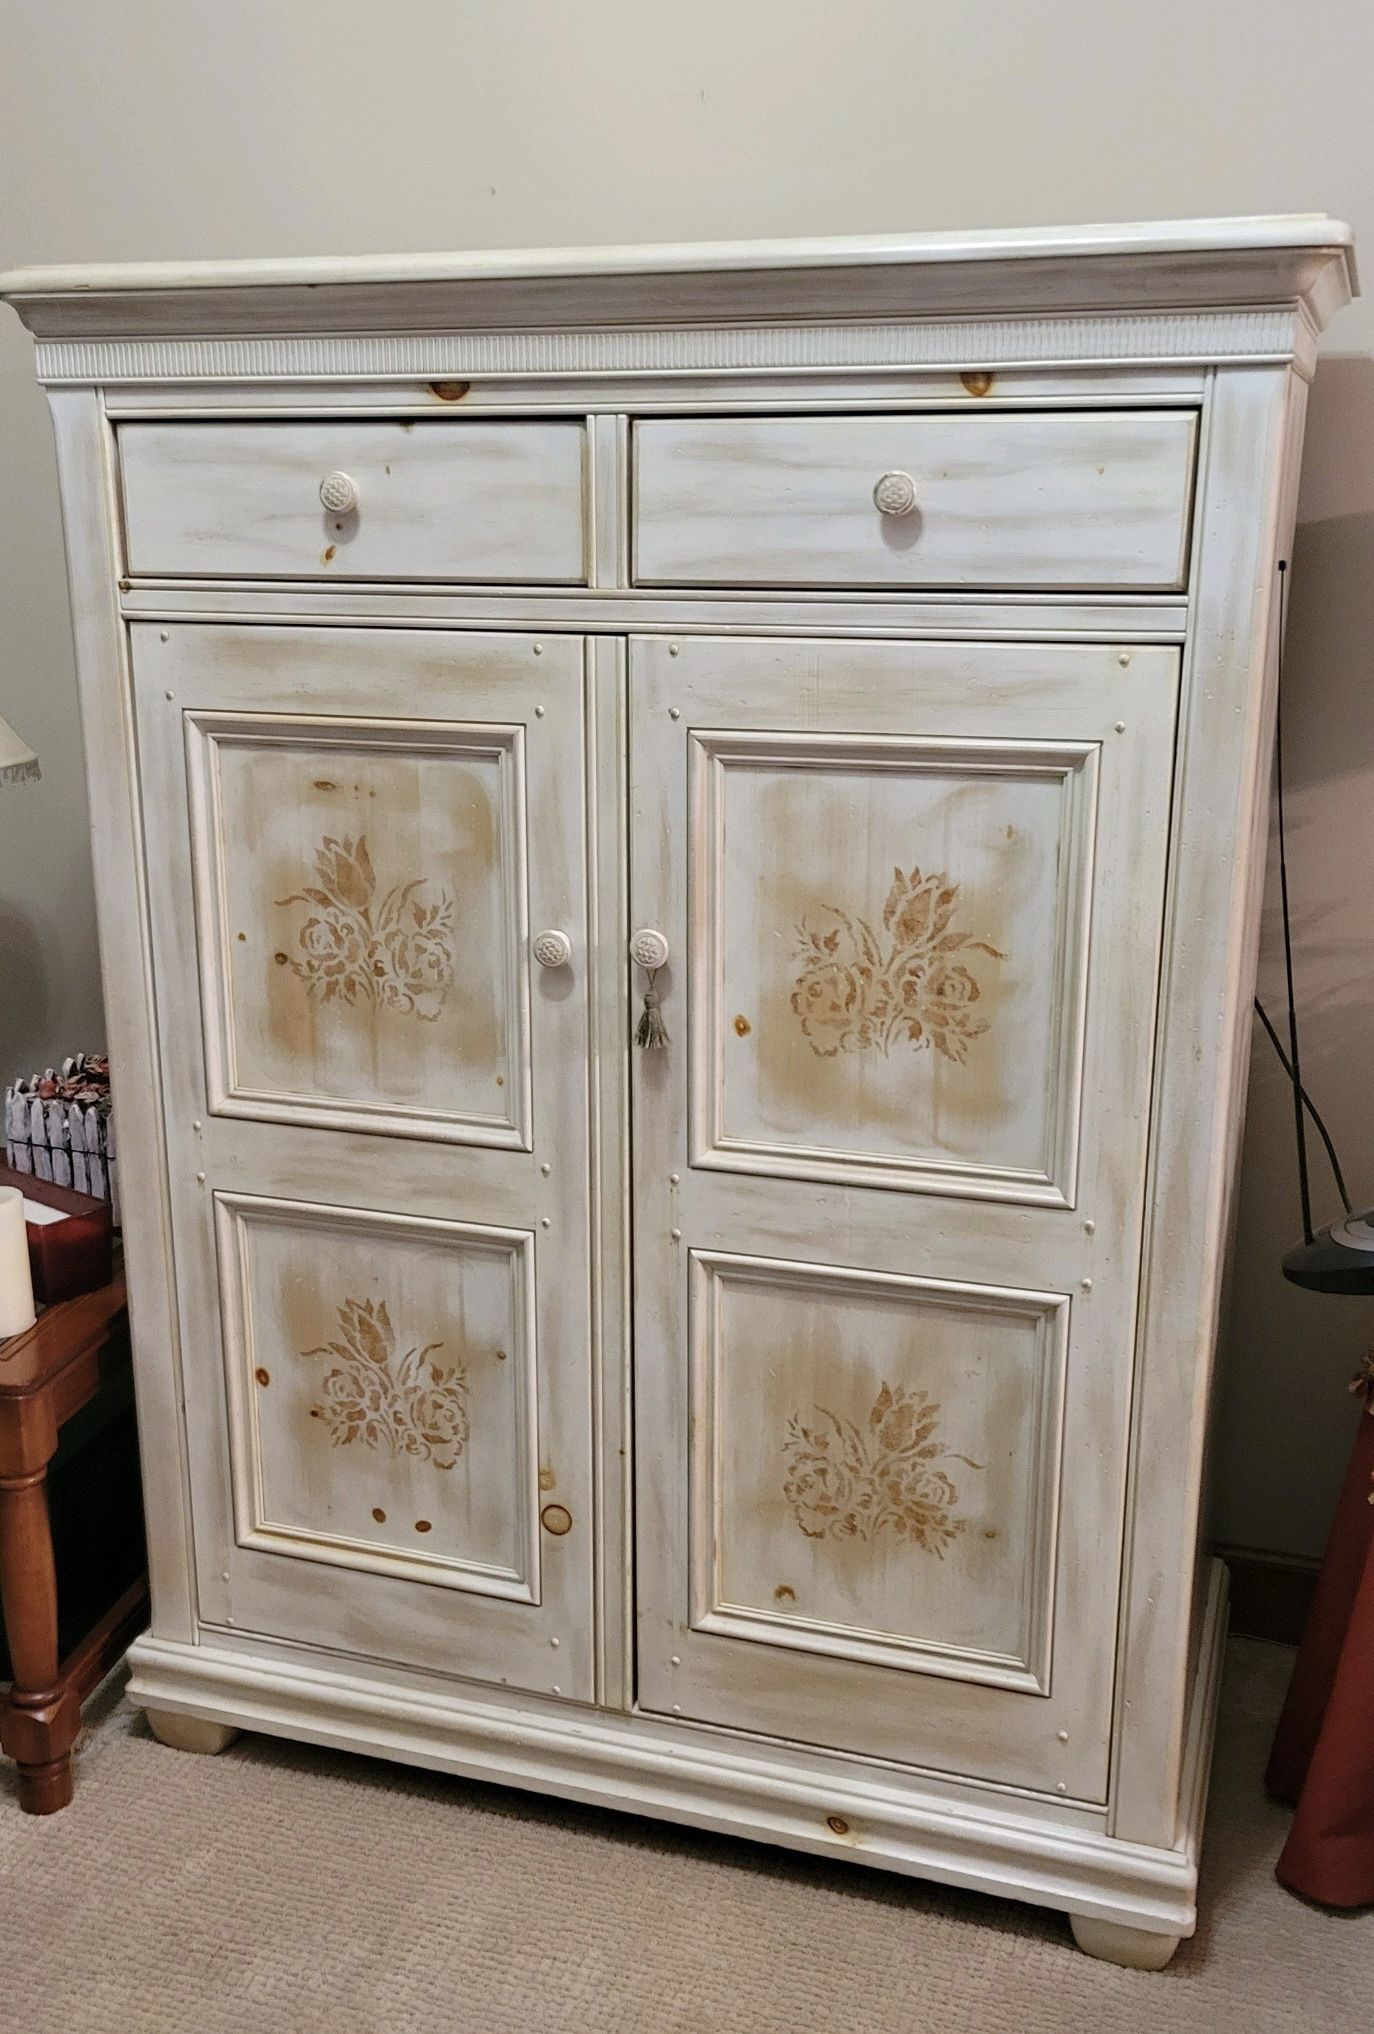 Armoire / Entertainment Center By Alexander Julian Home Colours 56” Tall. Cream With Gold Accents